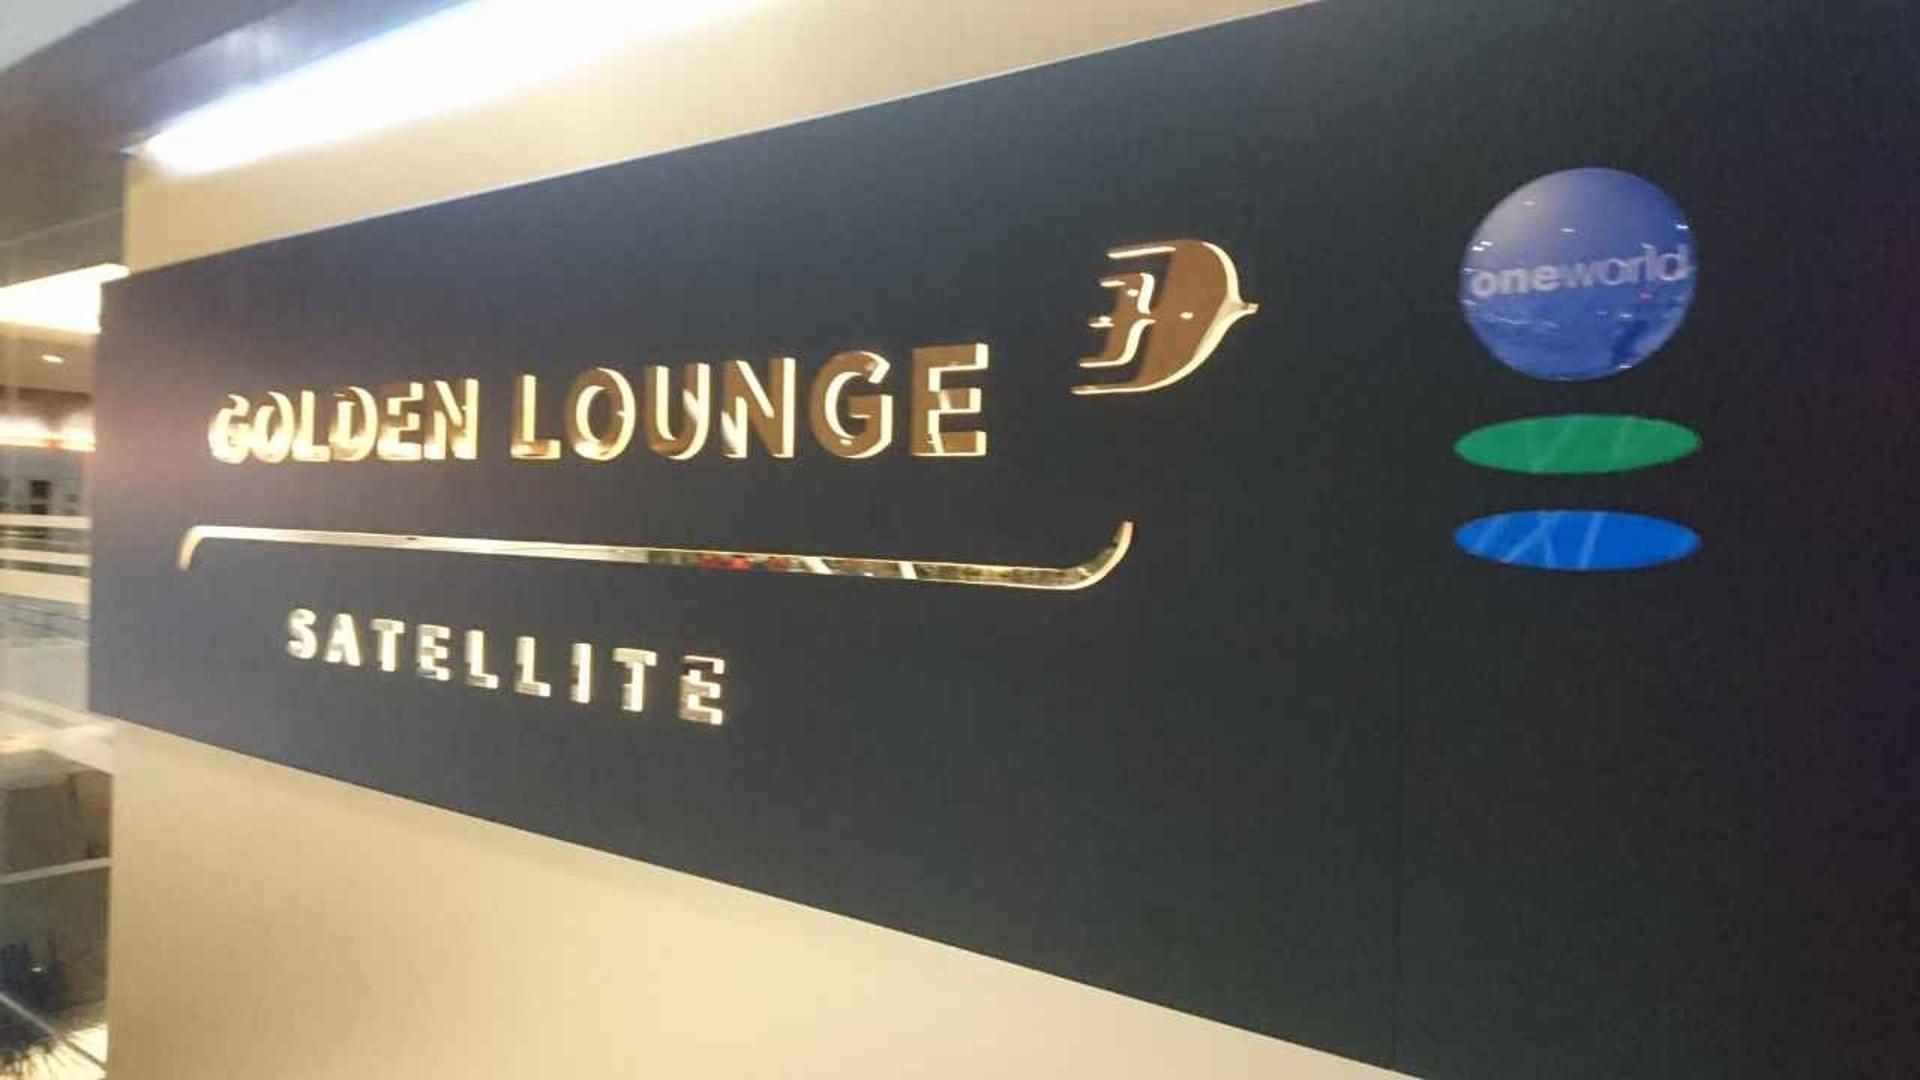 Malaysia Airlines Platinum Lounge image 8 of 26